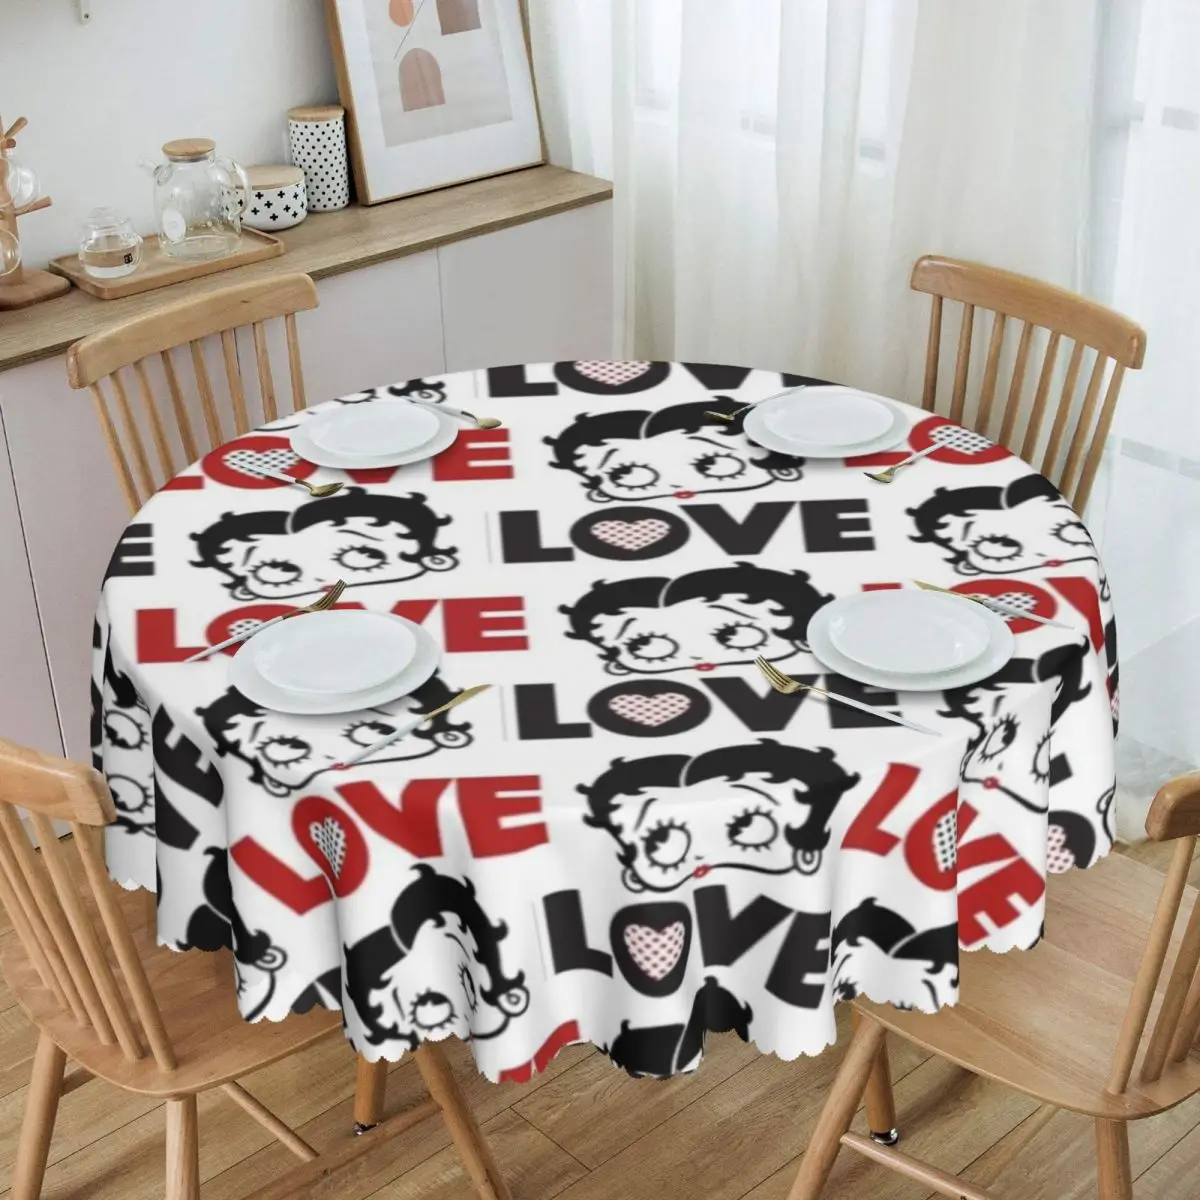 

Round Animation Bettys Boop Collage Table Cloth Waterproof Tablecloth 60 inches Table Cover for Kitchen Dinning